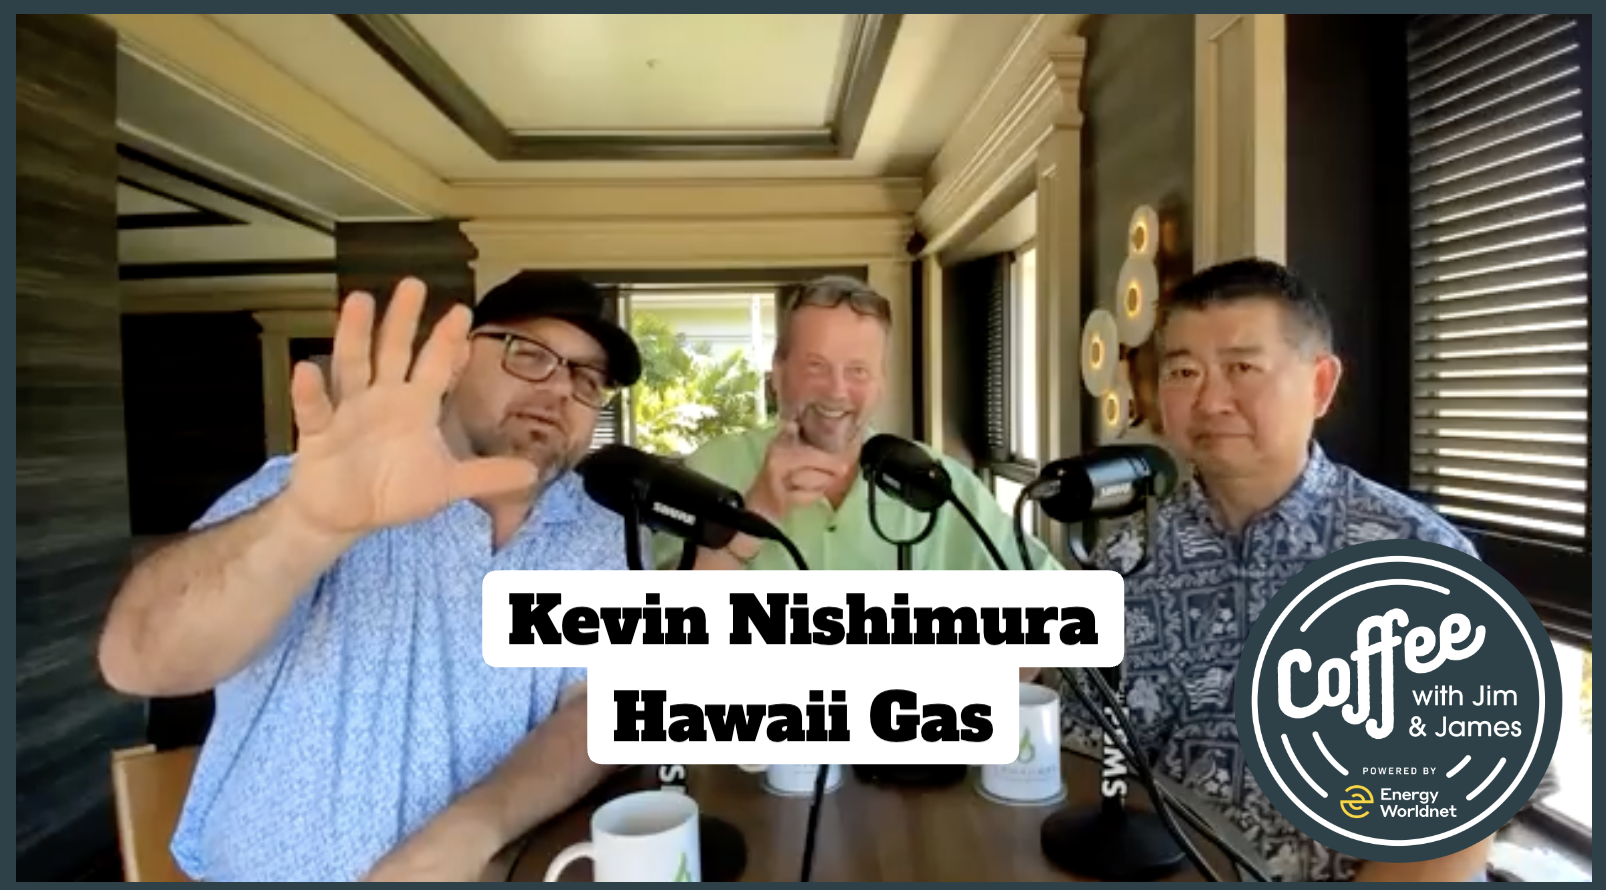 Kevin Nishimura from Hawaii Gas - Coffee with Jim and James Episode 172